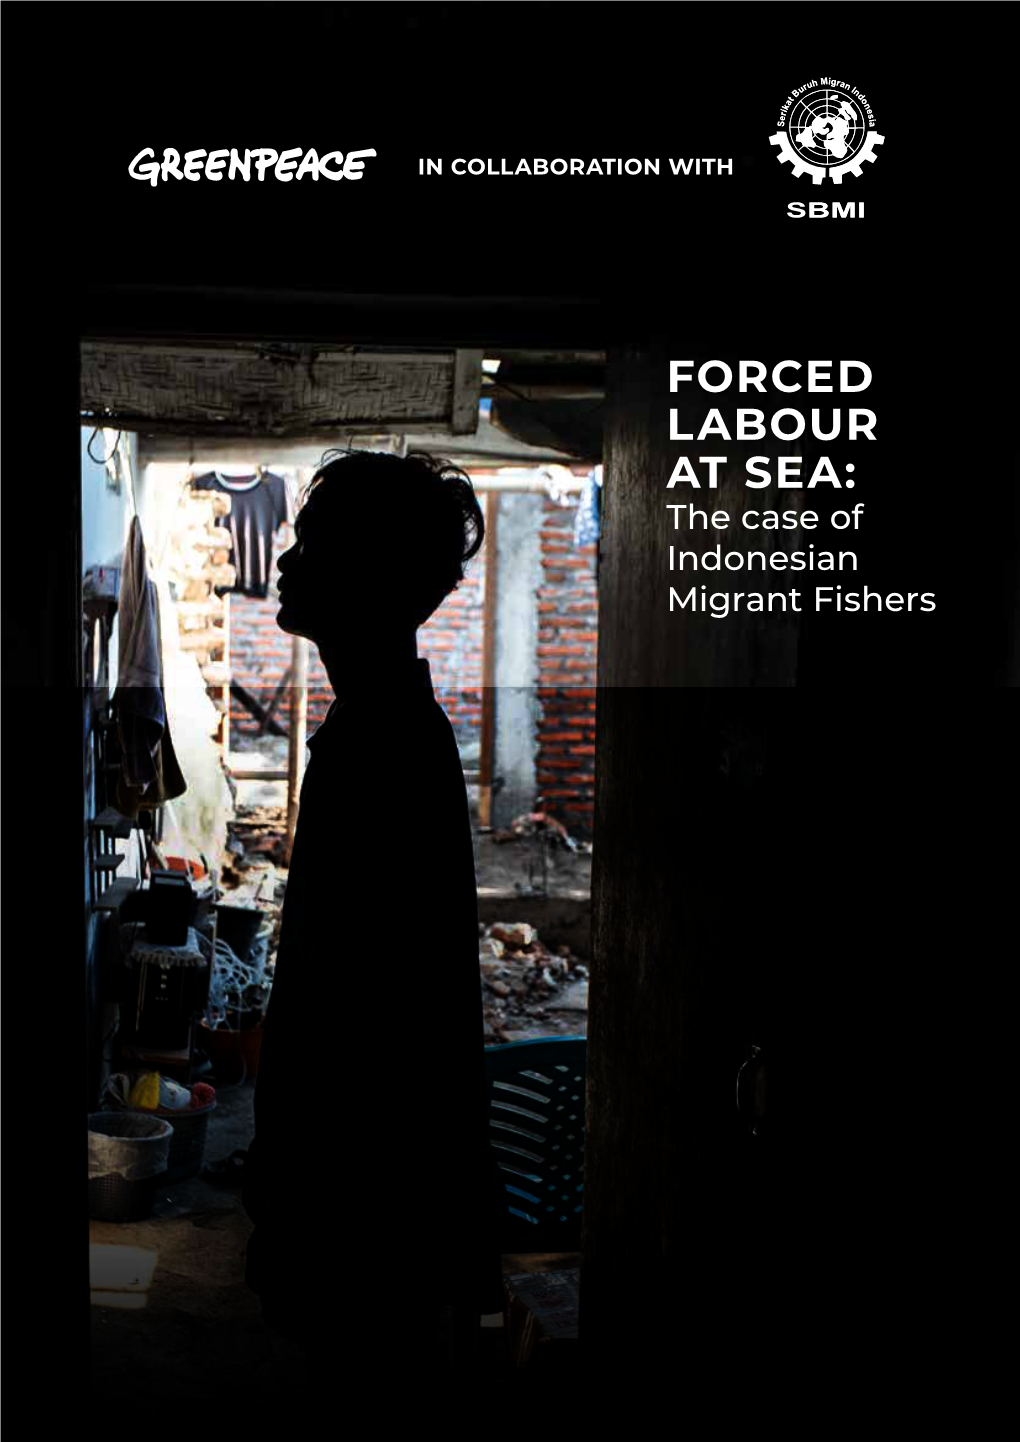 FORCED LABOUR at SEA: the Case of Indonesian Migrant Fishers in COLLABORATION WITH